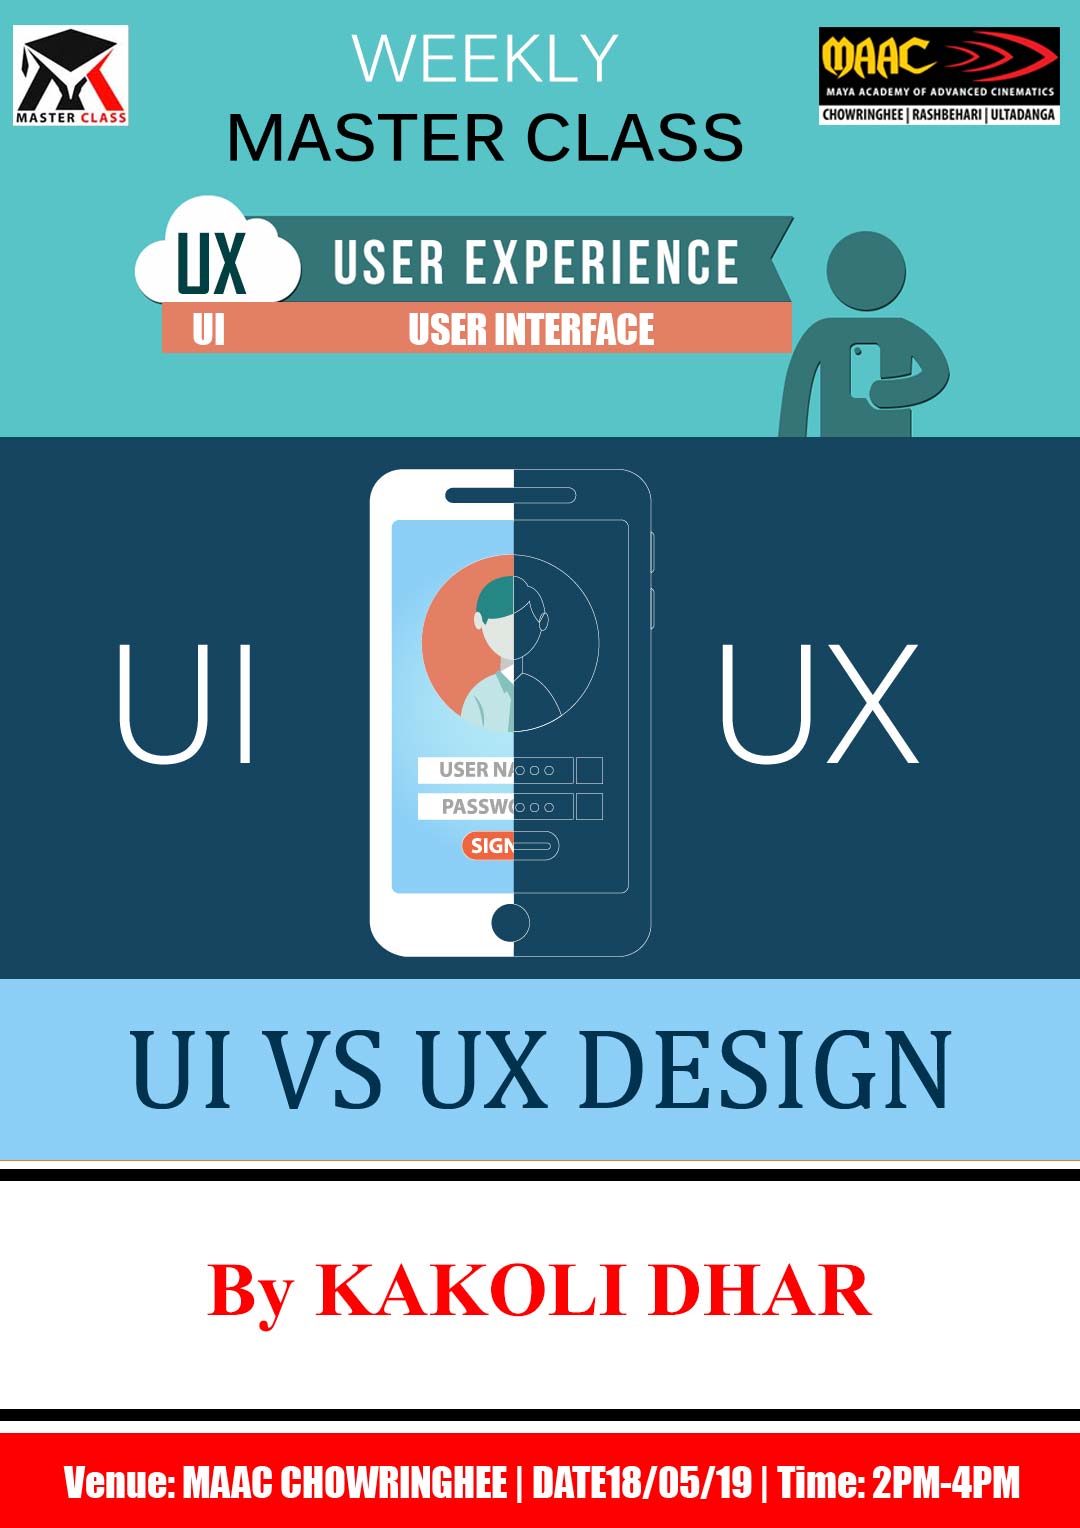 Weekly Master Class on UI UX User Experience